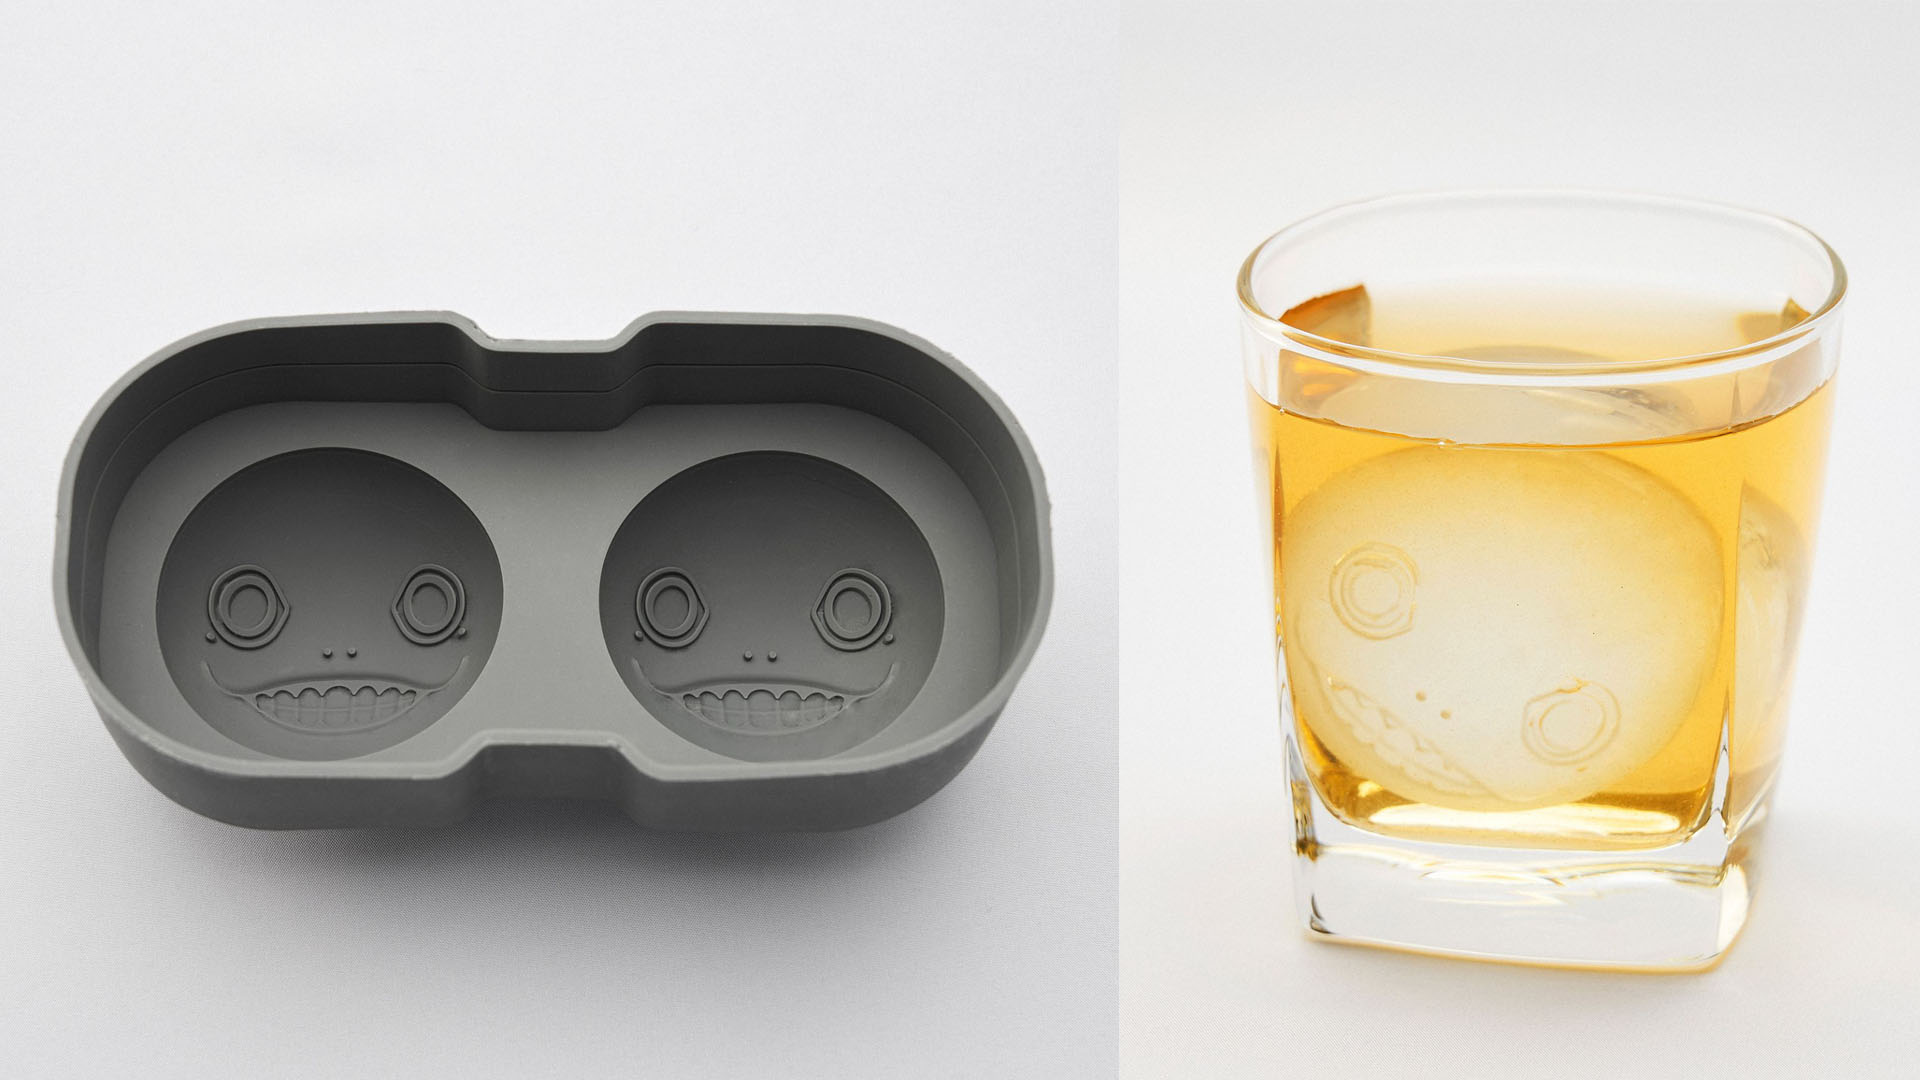 New NieR silicone ice tray lets you get Emil in your whiskey